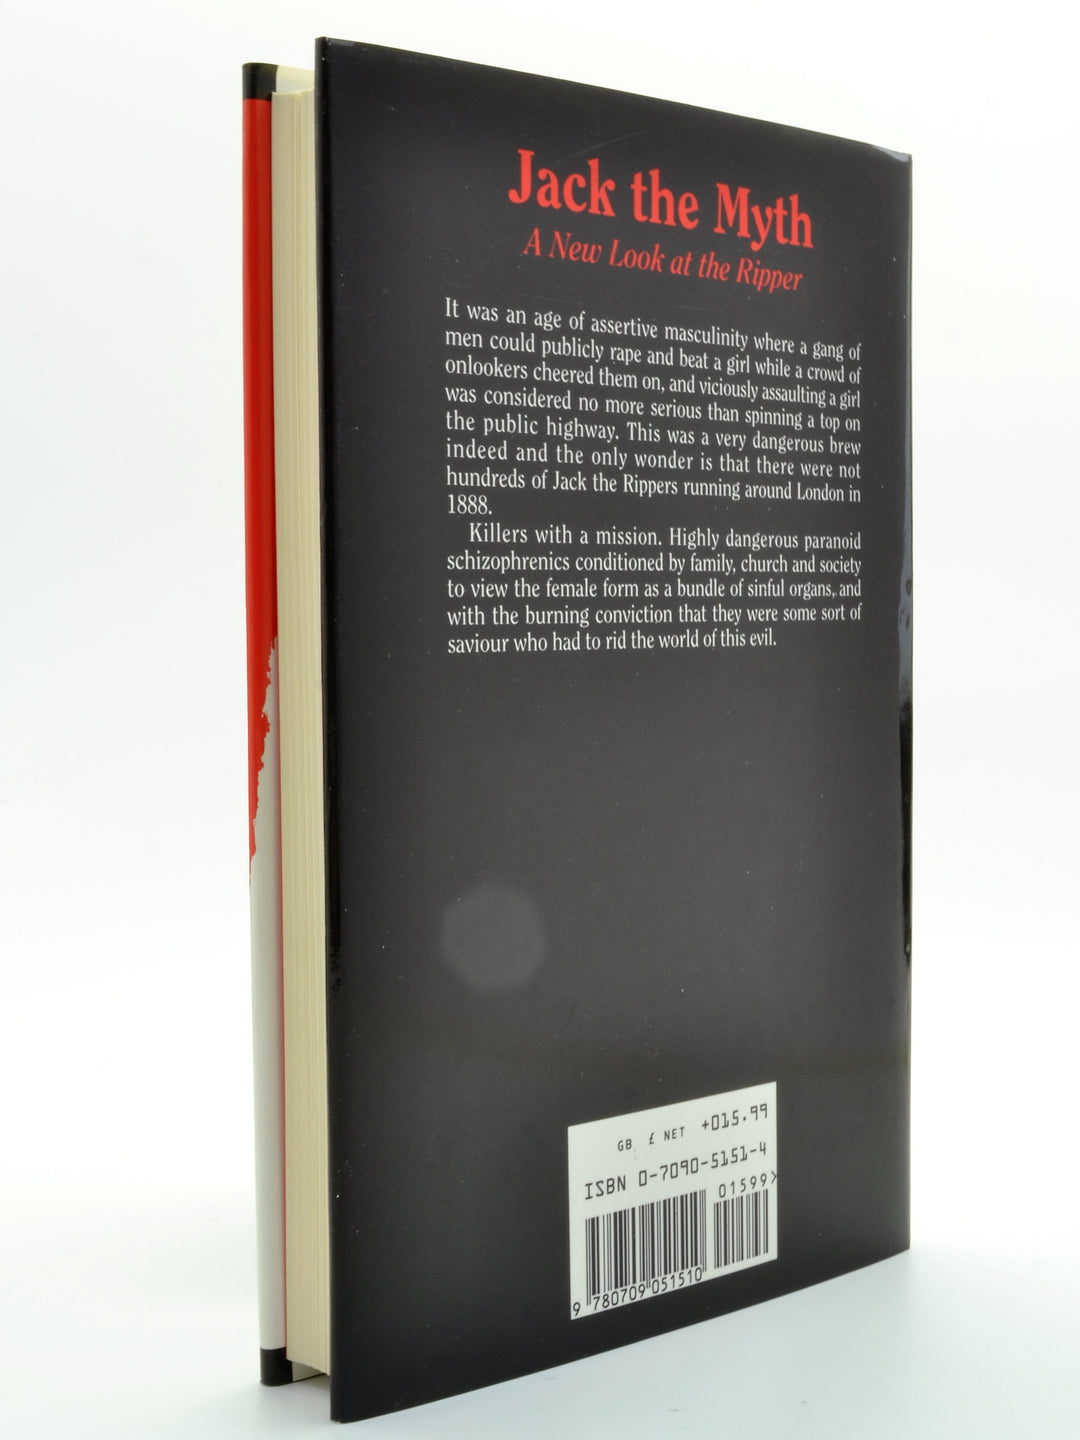 Wolf, A P - Jack the Myth | back cover